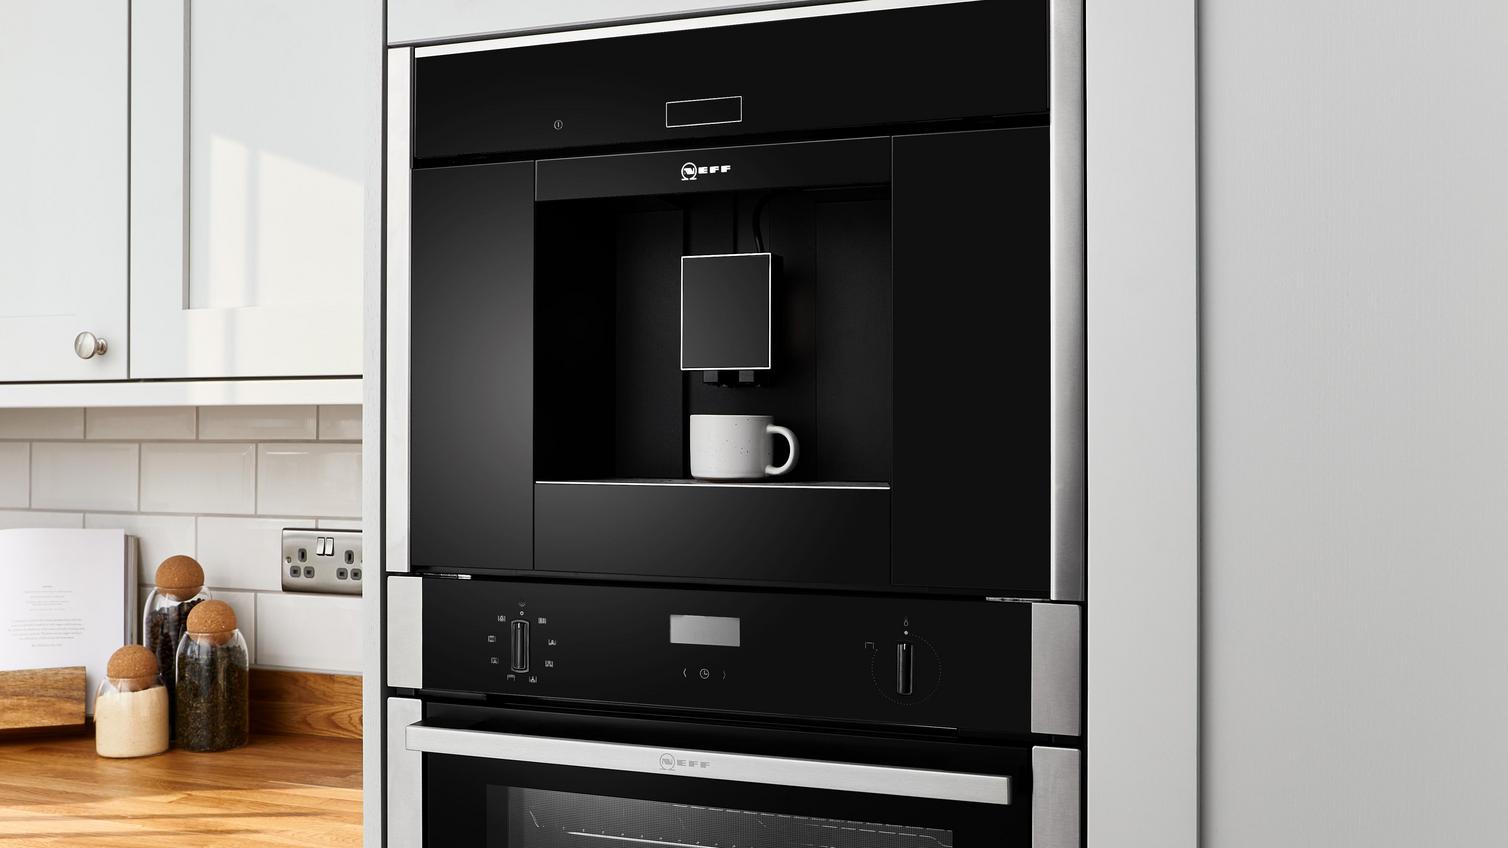 An inbuilt coffee machine and oven